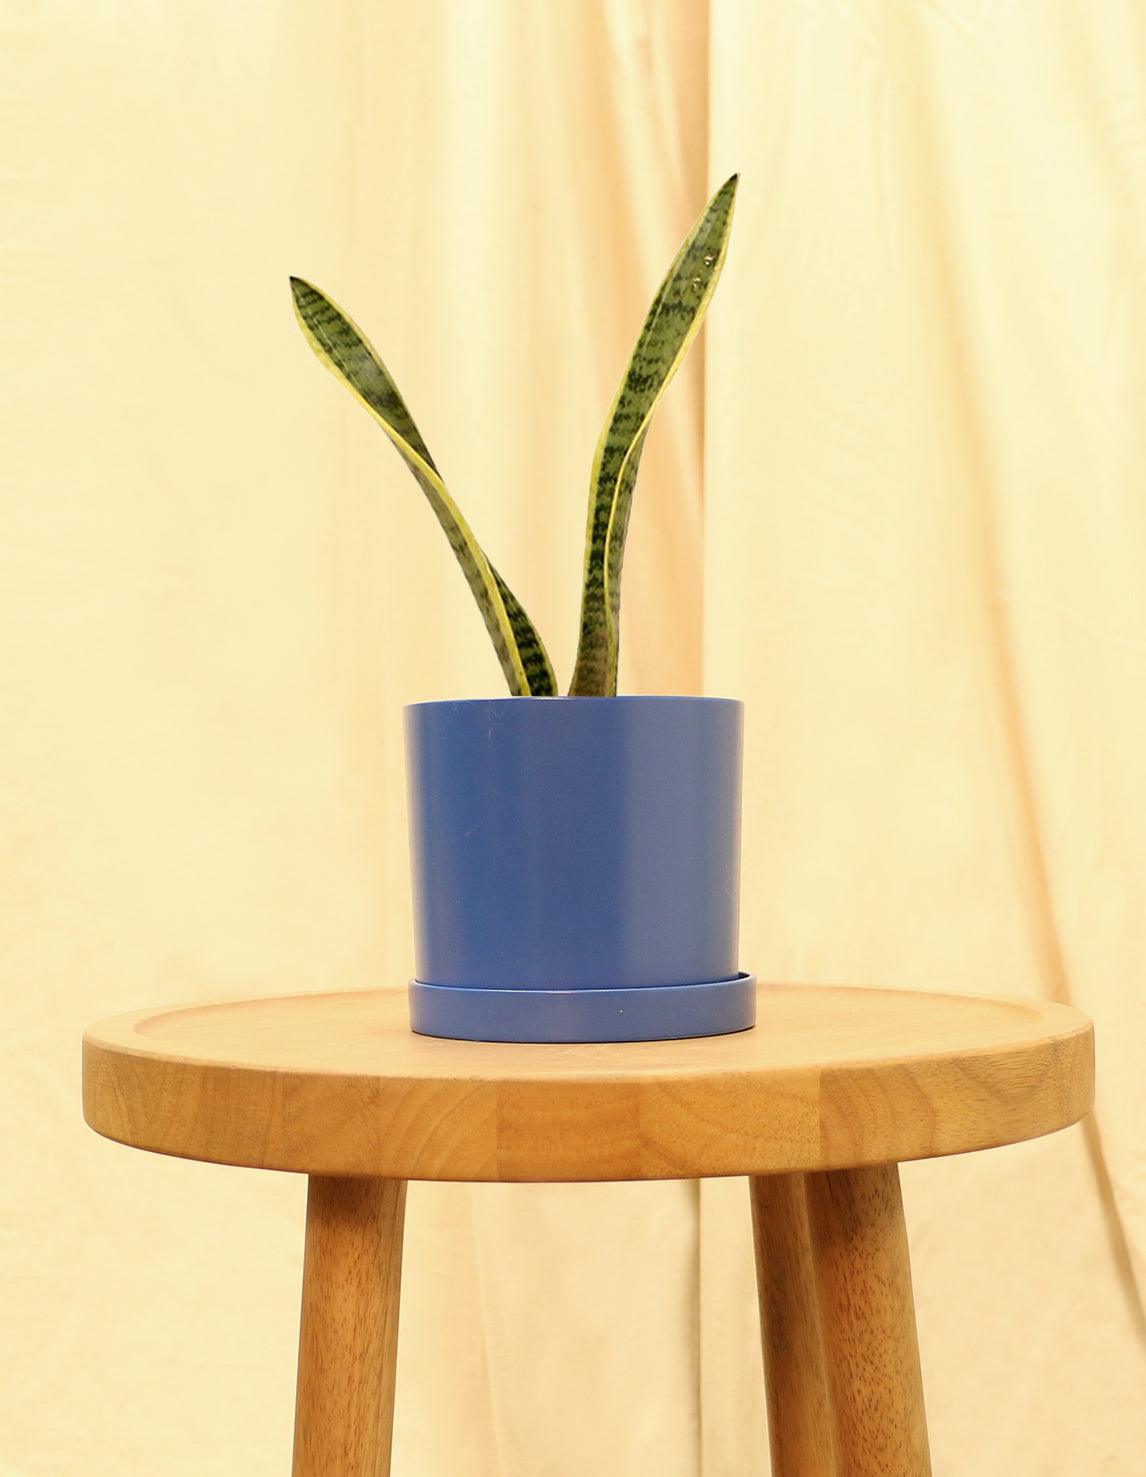 Small Variegated Snake Plant in blue pot.